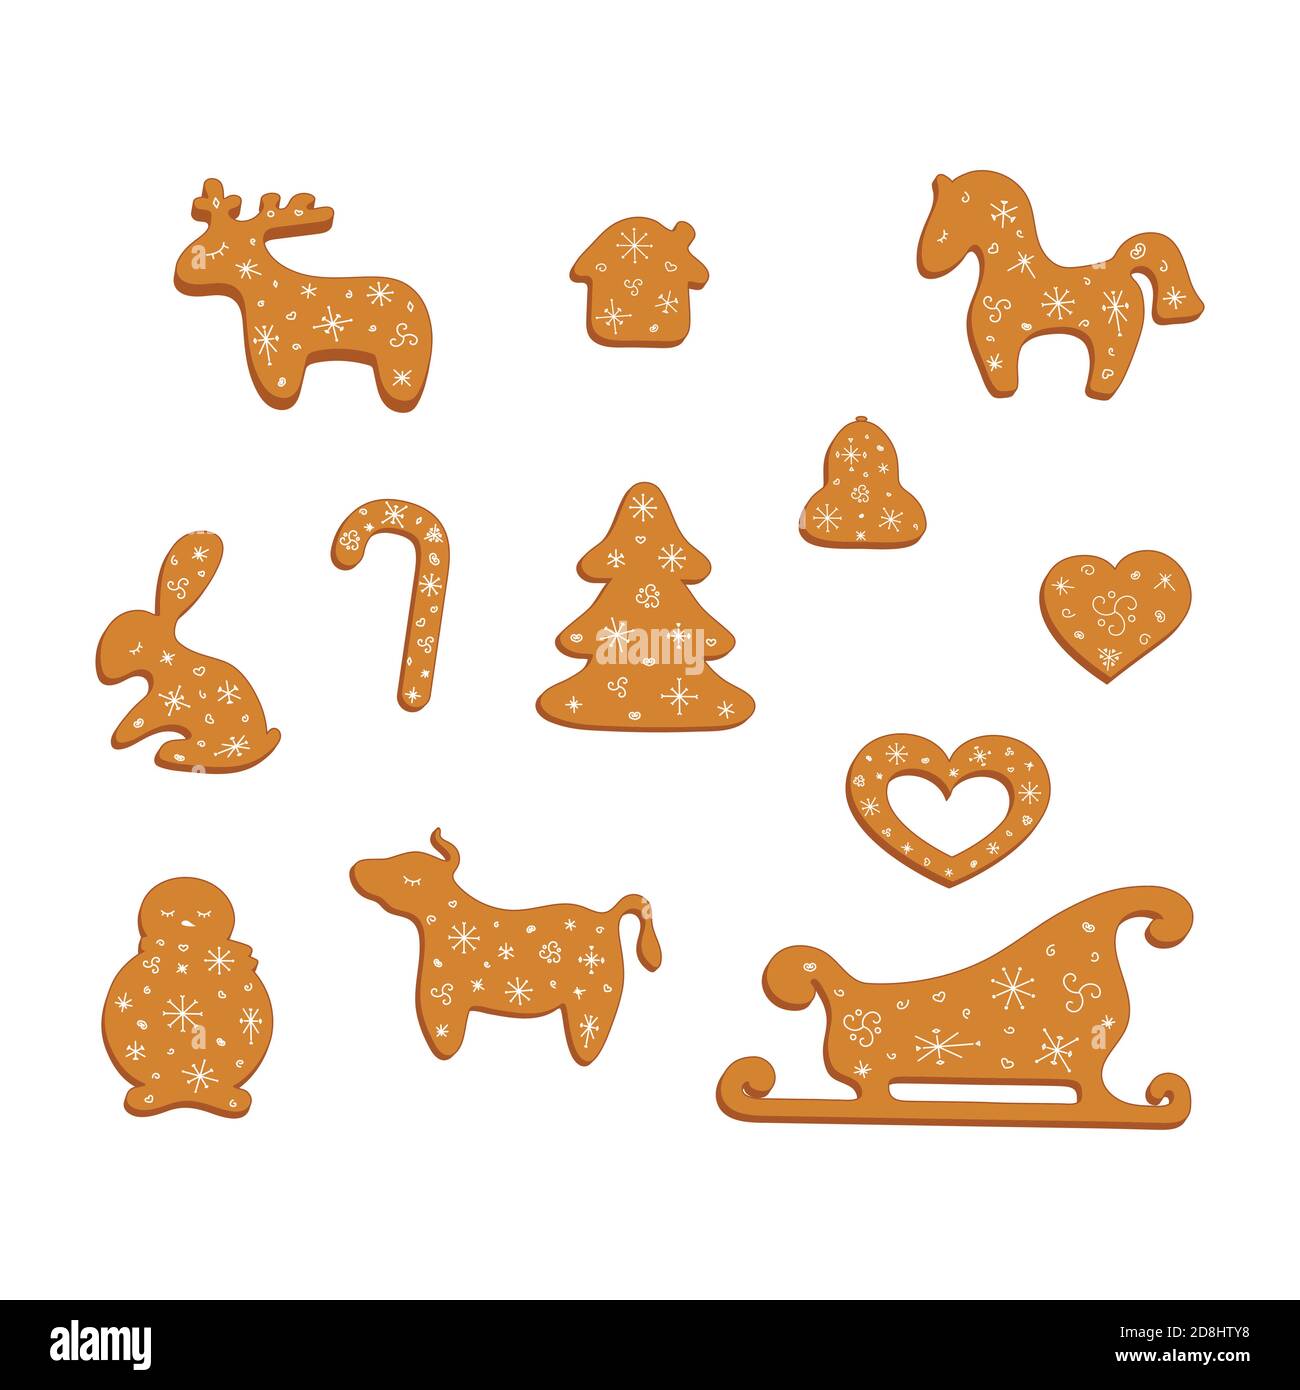 Big set of gingerbread cookies. Decorative gingerbread deer, hors, christmas tree, house, rabbit, candy cane, bell, heart, snowman, bull and sleigh wi Stock Vector